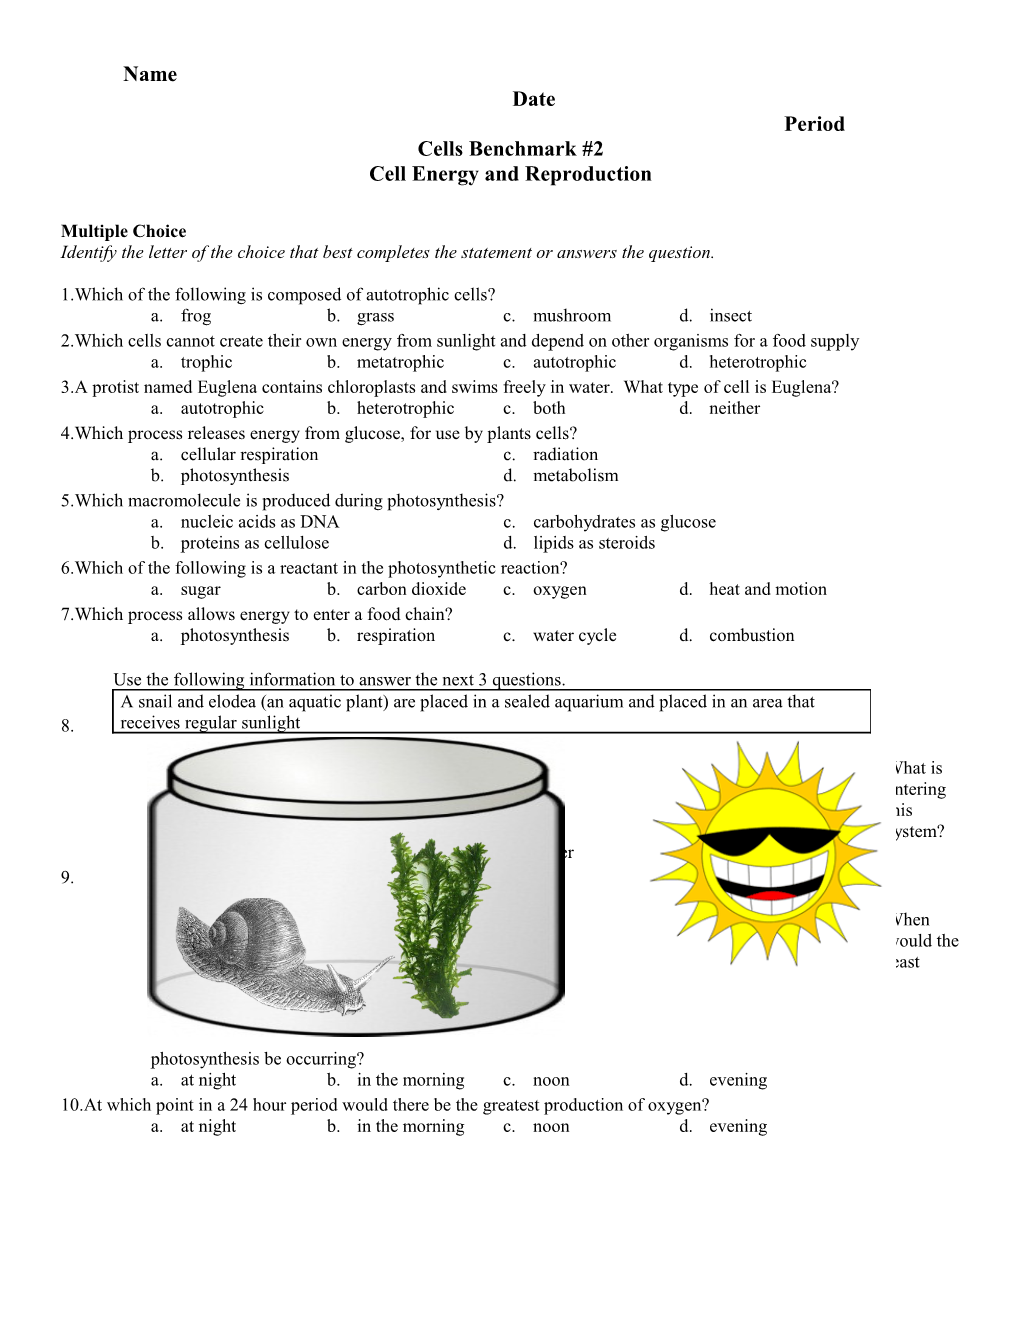 Cell Energy and Reproduction